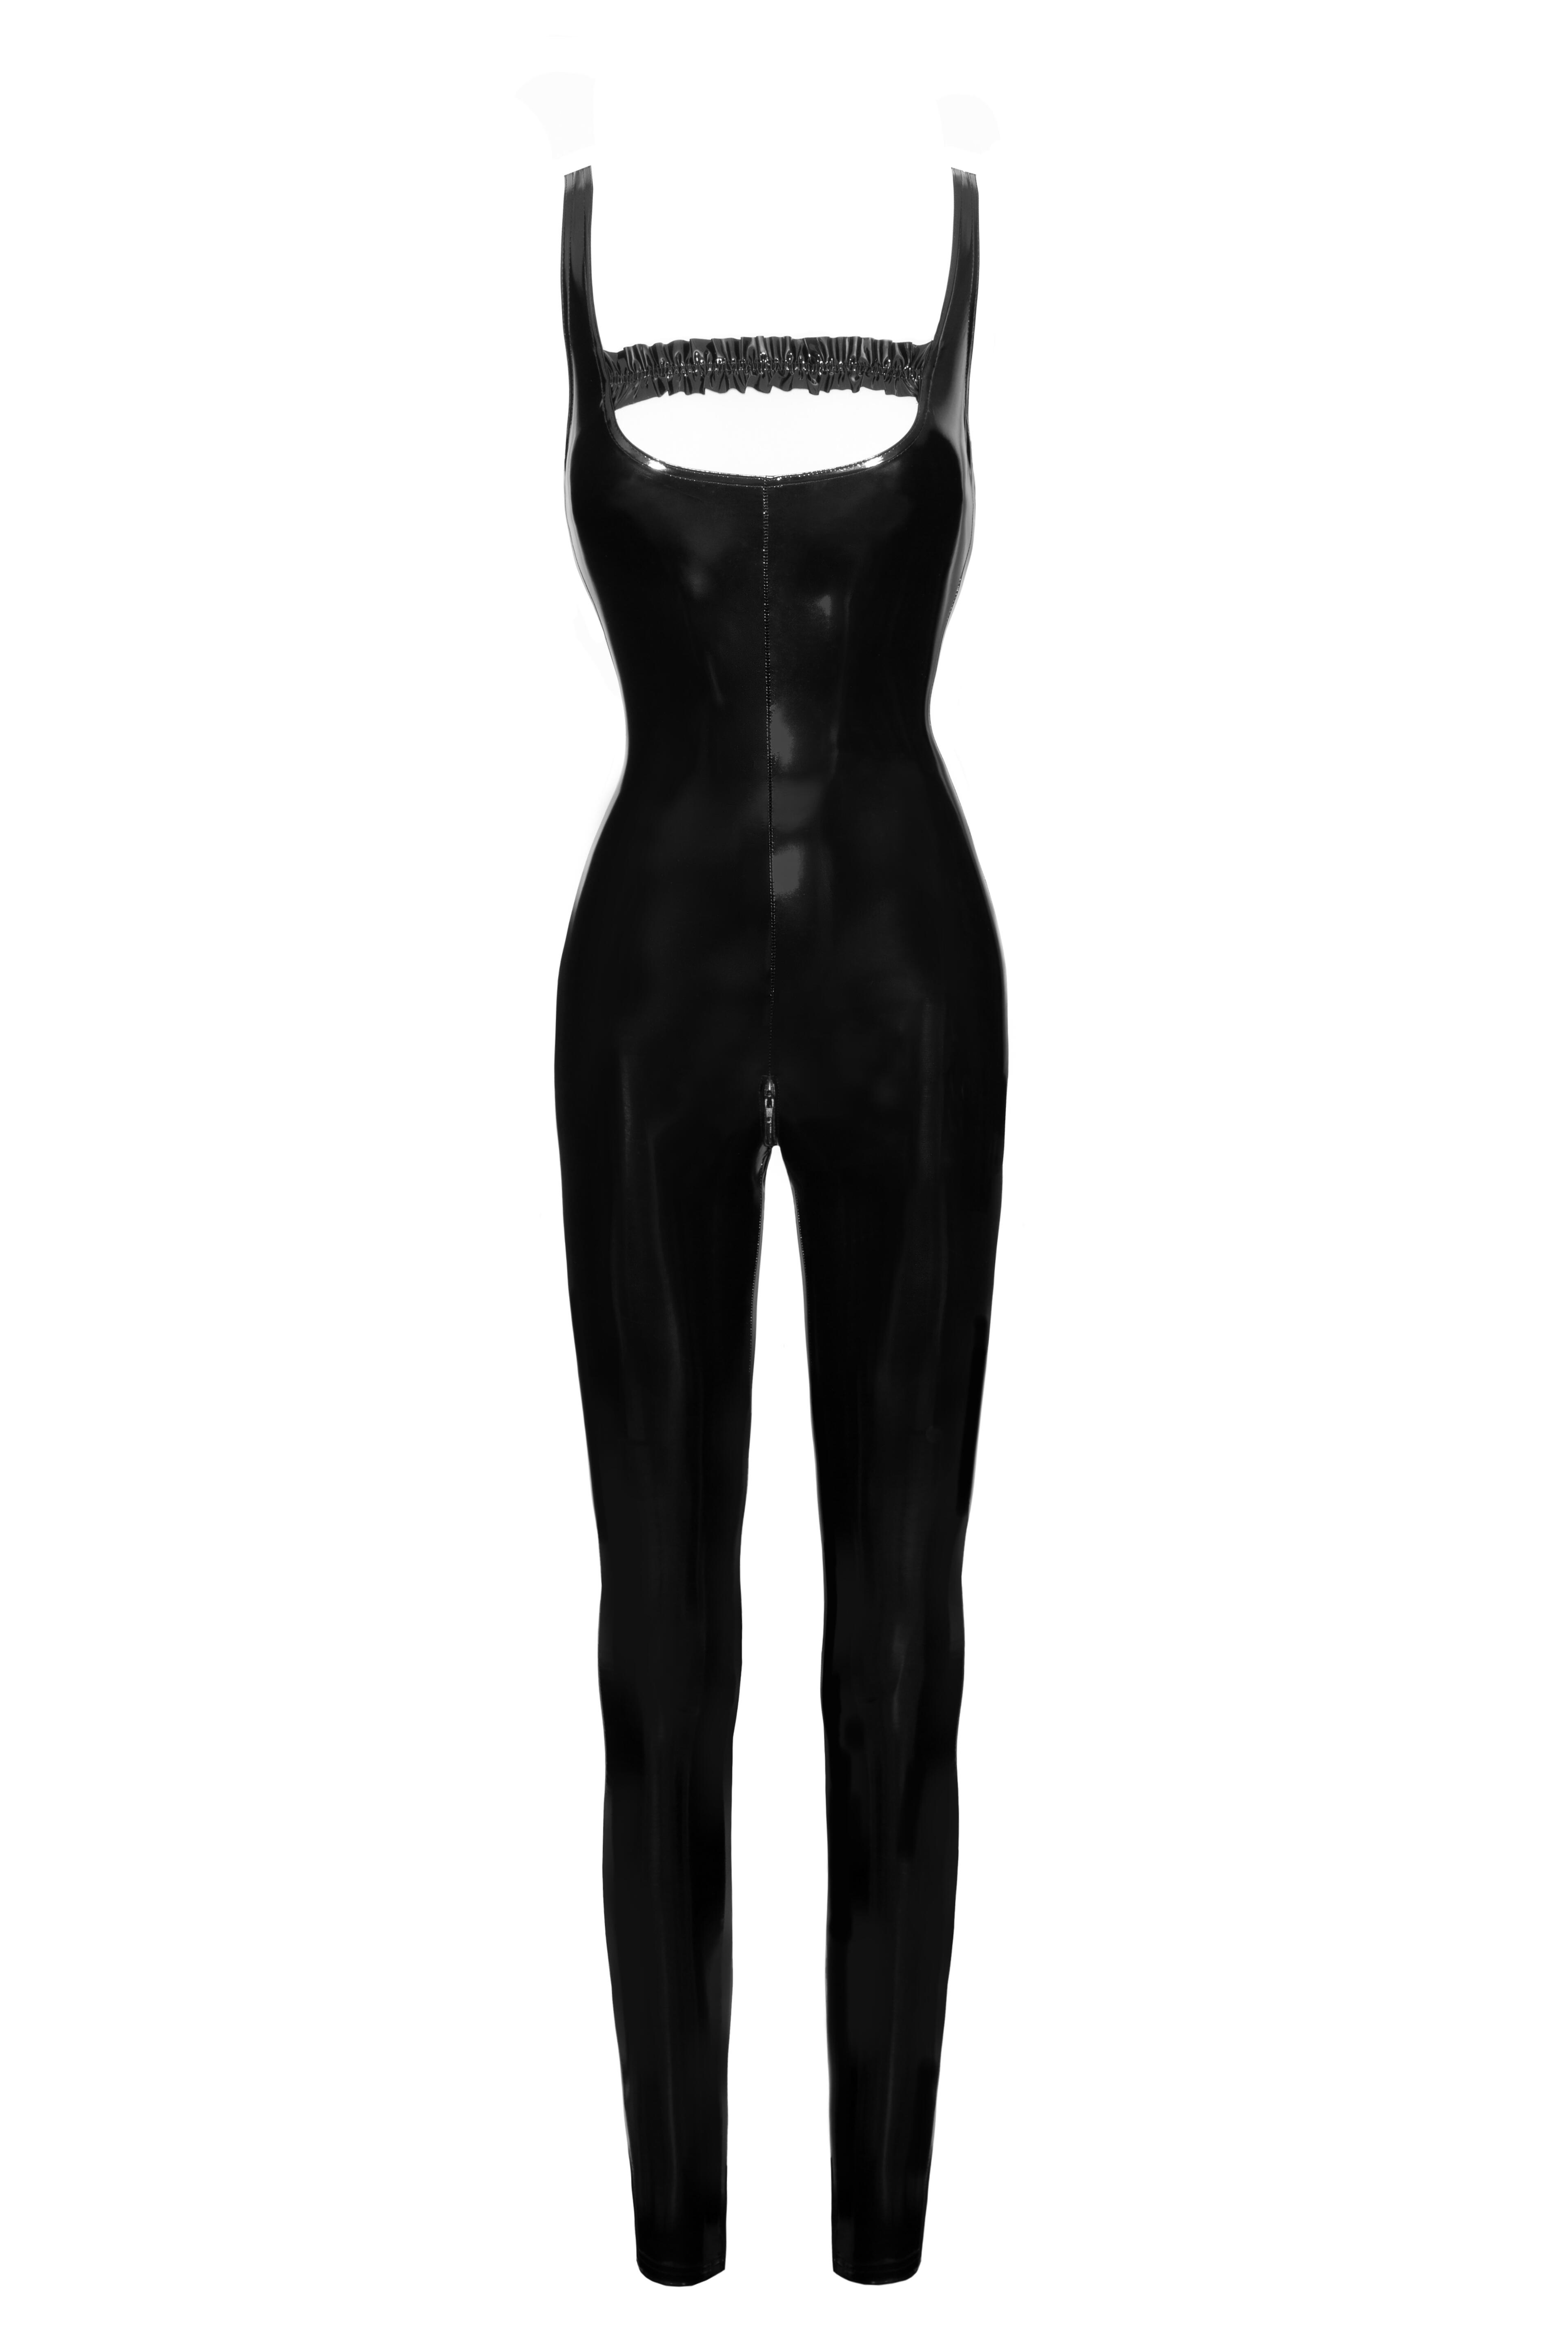 Patent Leather PVC Catsuit front